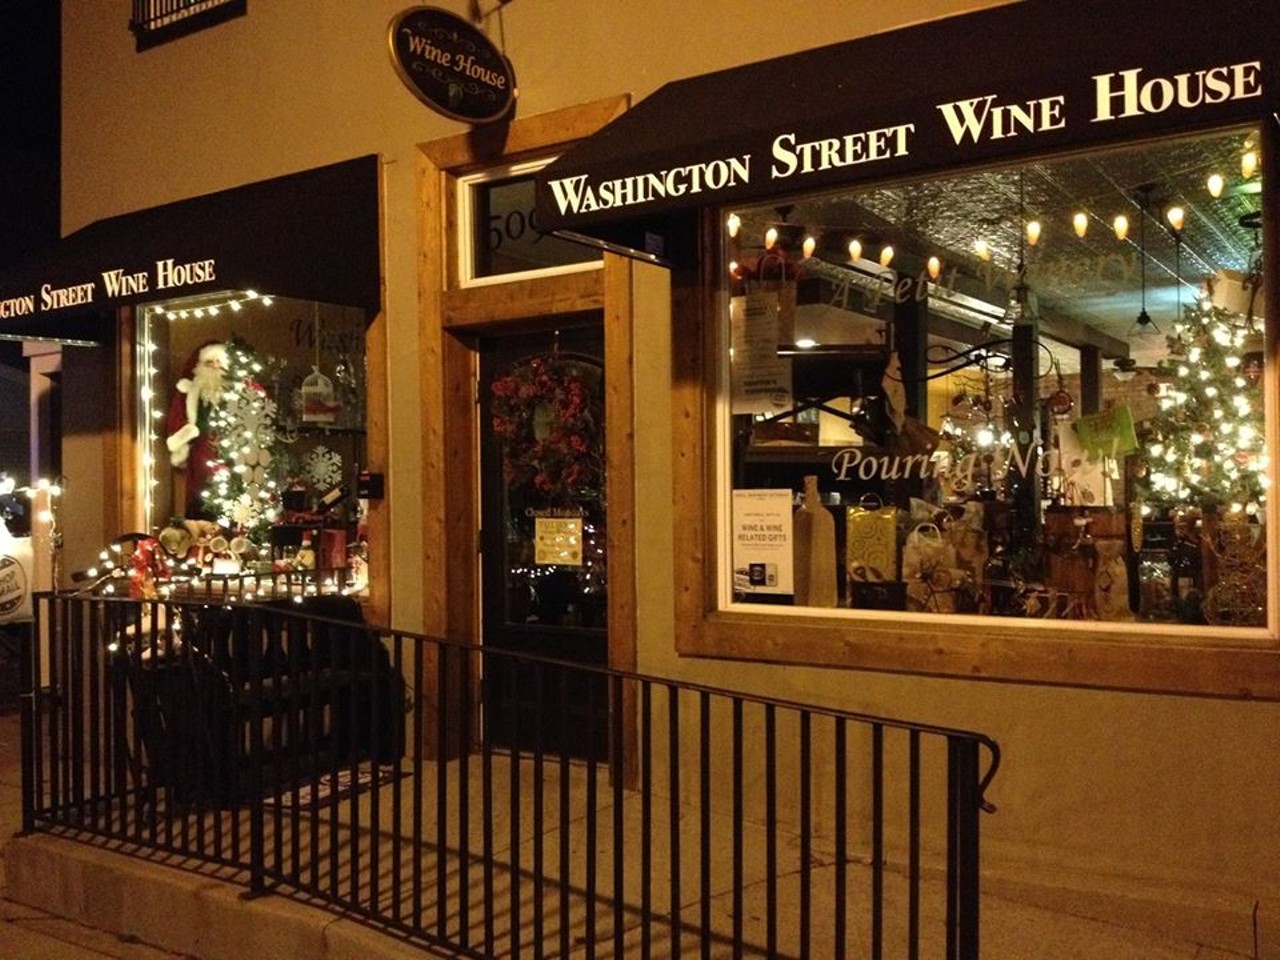 Washington Street Wine House, New Baltimore
Located in downtown New Baltimore with spectacular views of Anchor Bay, this boutique winery offers varieties ranging from classic merlot to exotic wines with ingredients like pomegranate and dragonfruit. Part of the Thumbs Up Wine Trail. (Photo Credit: Washington Street Wine House via Facebook)